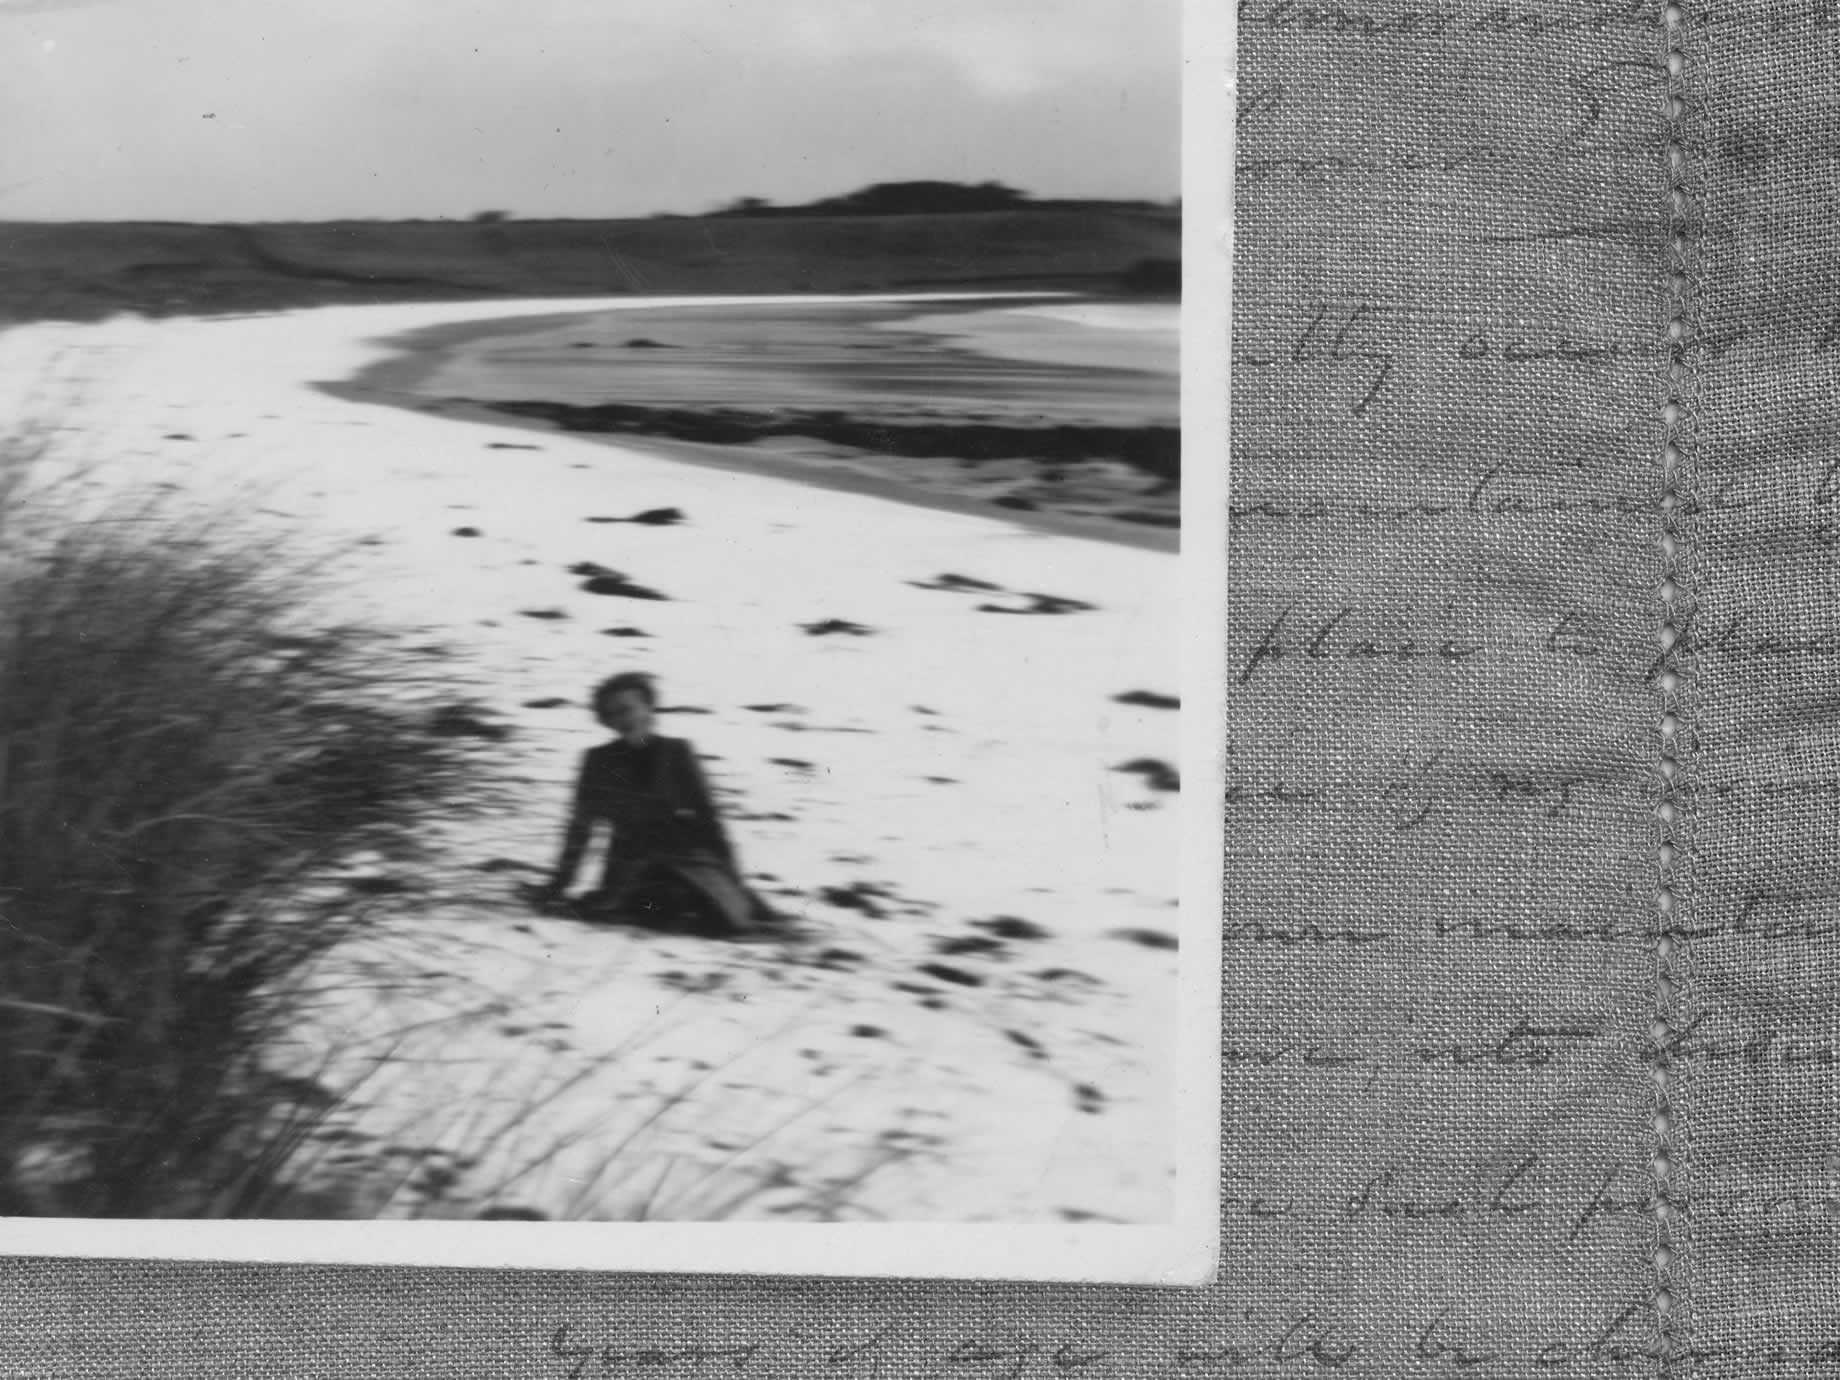 A rare picture of snow on Godfreys Beach, with Meg pictured in foreground, 1943